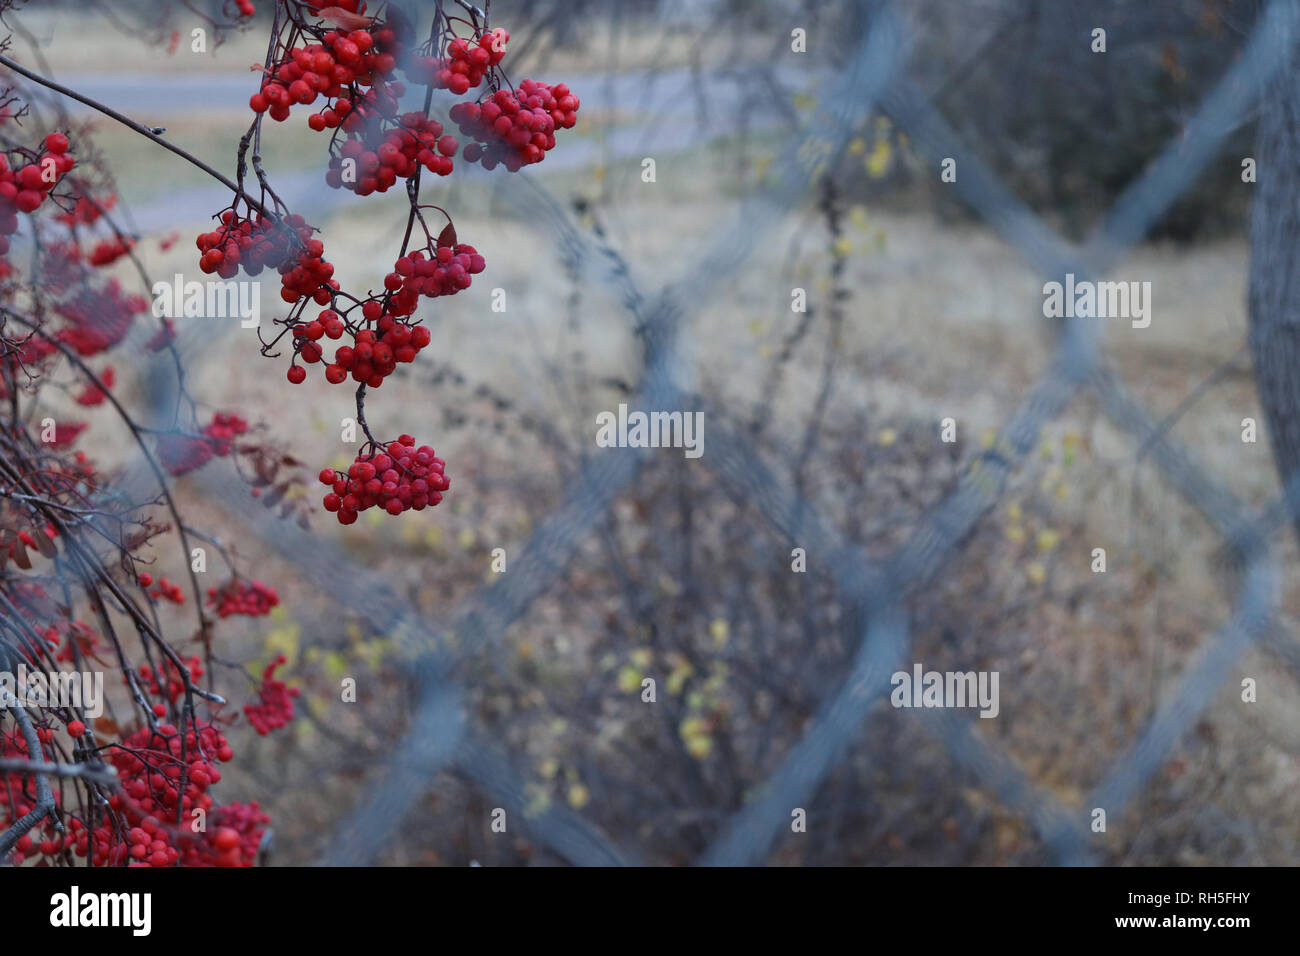 Fall berries as seen through chain link fence Stock Photo